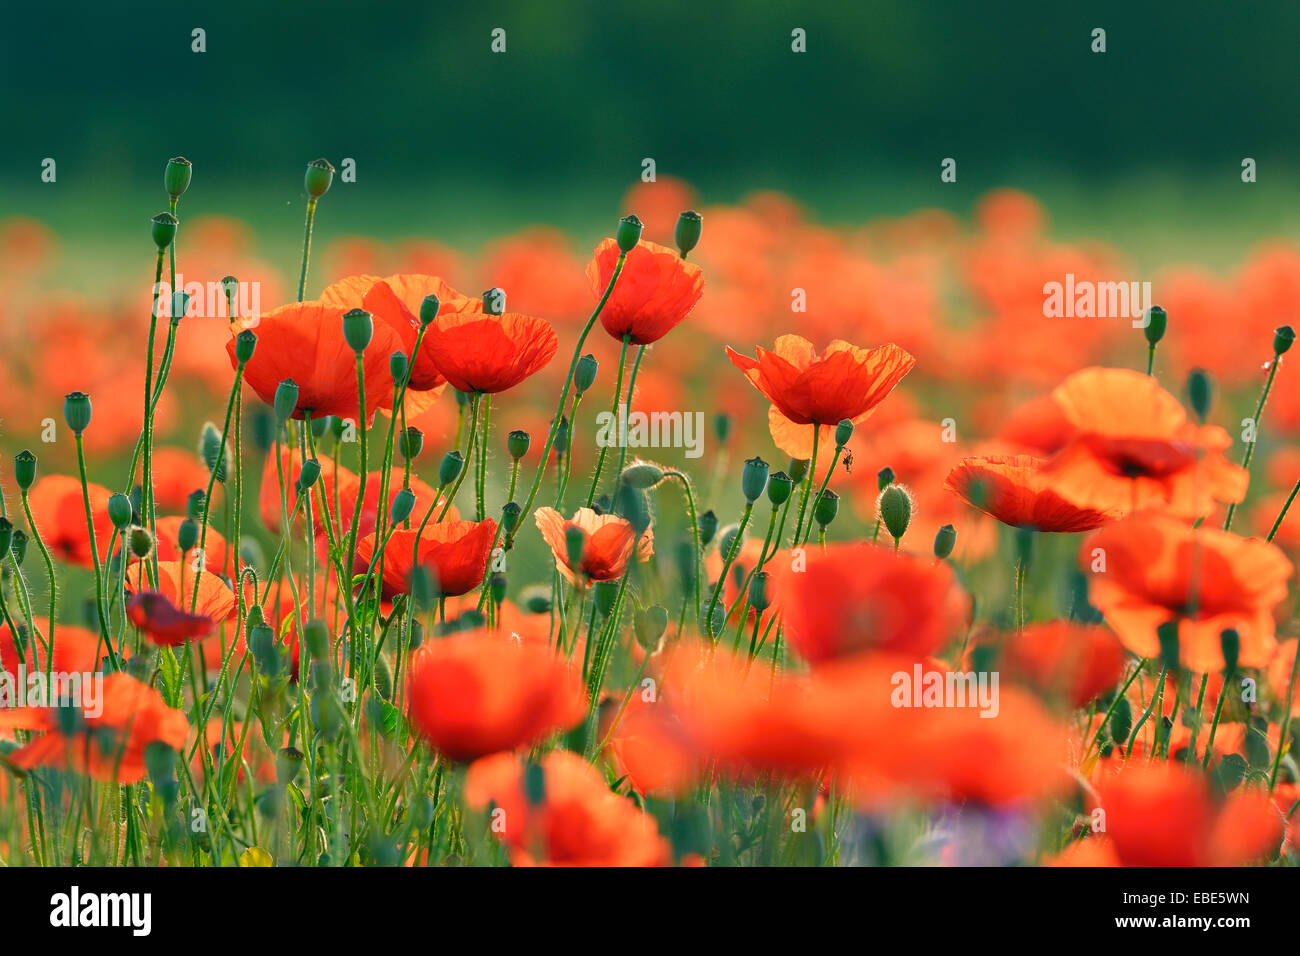 Field with Red Poppies (Papaver rhoeas), Pfungstadt, Hesse, Germany, Europe Stock Photo